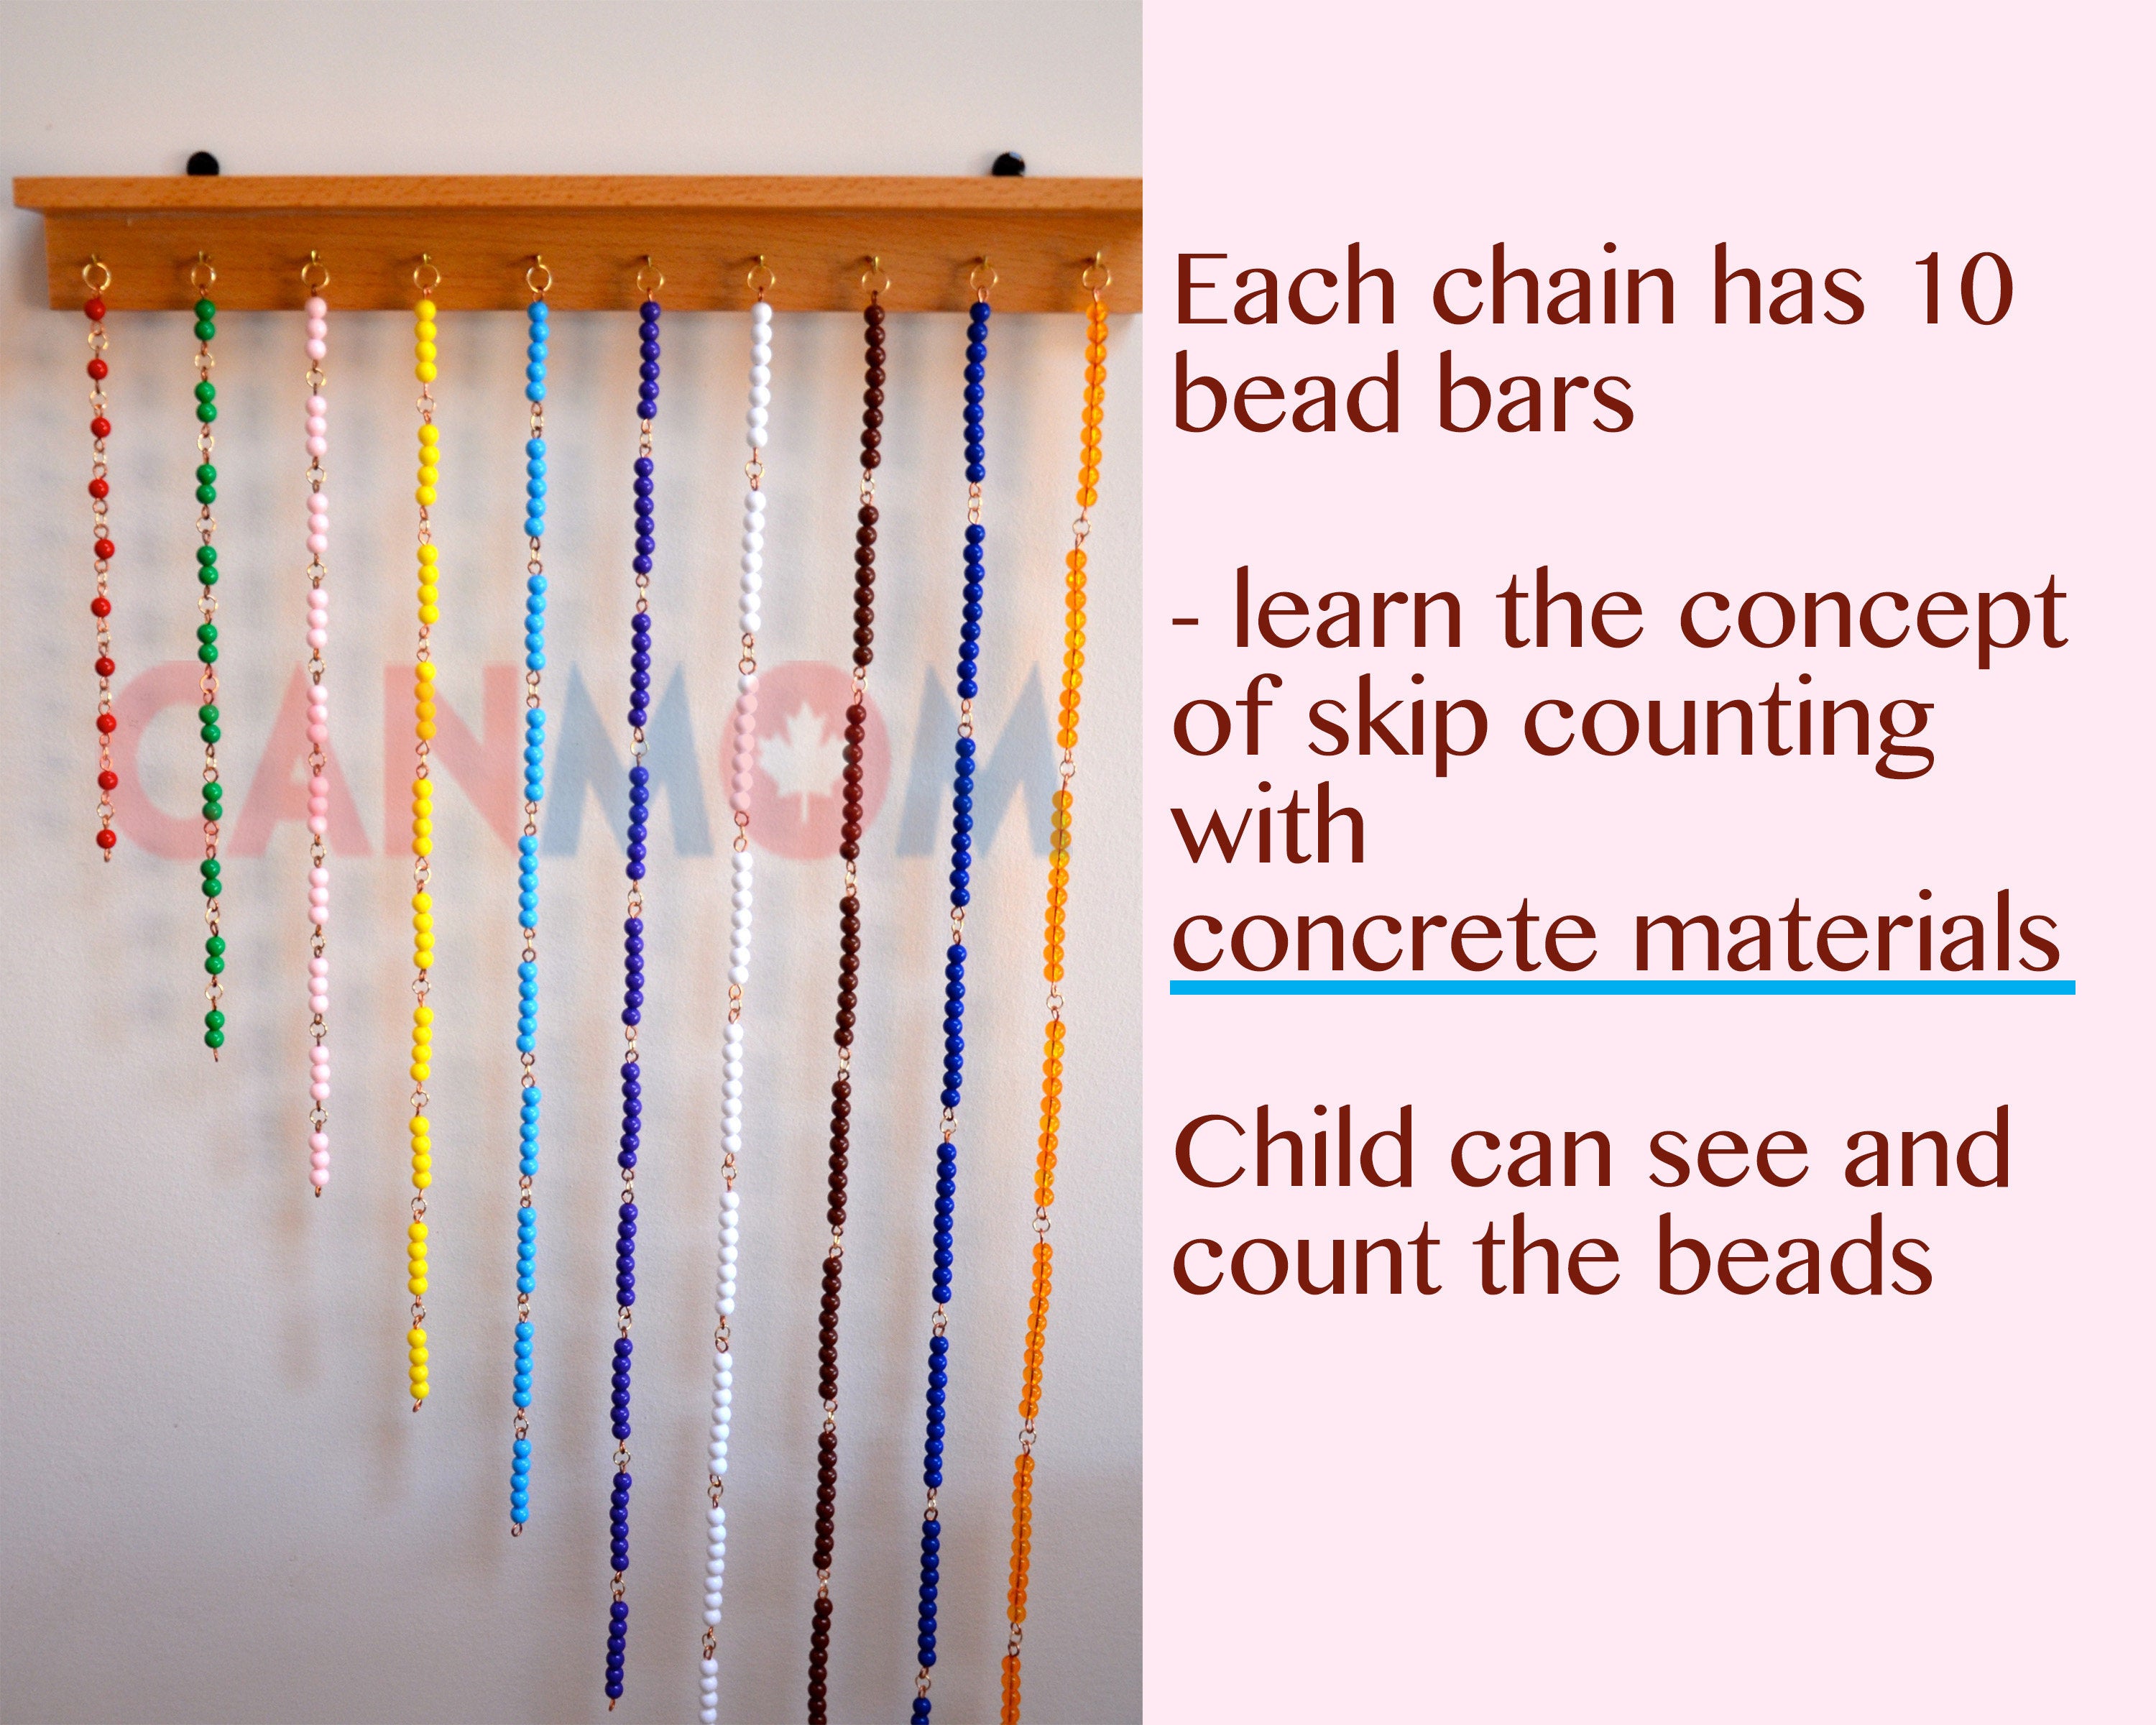 Montessori Multiplication toy / times table bead chains with wooden tags